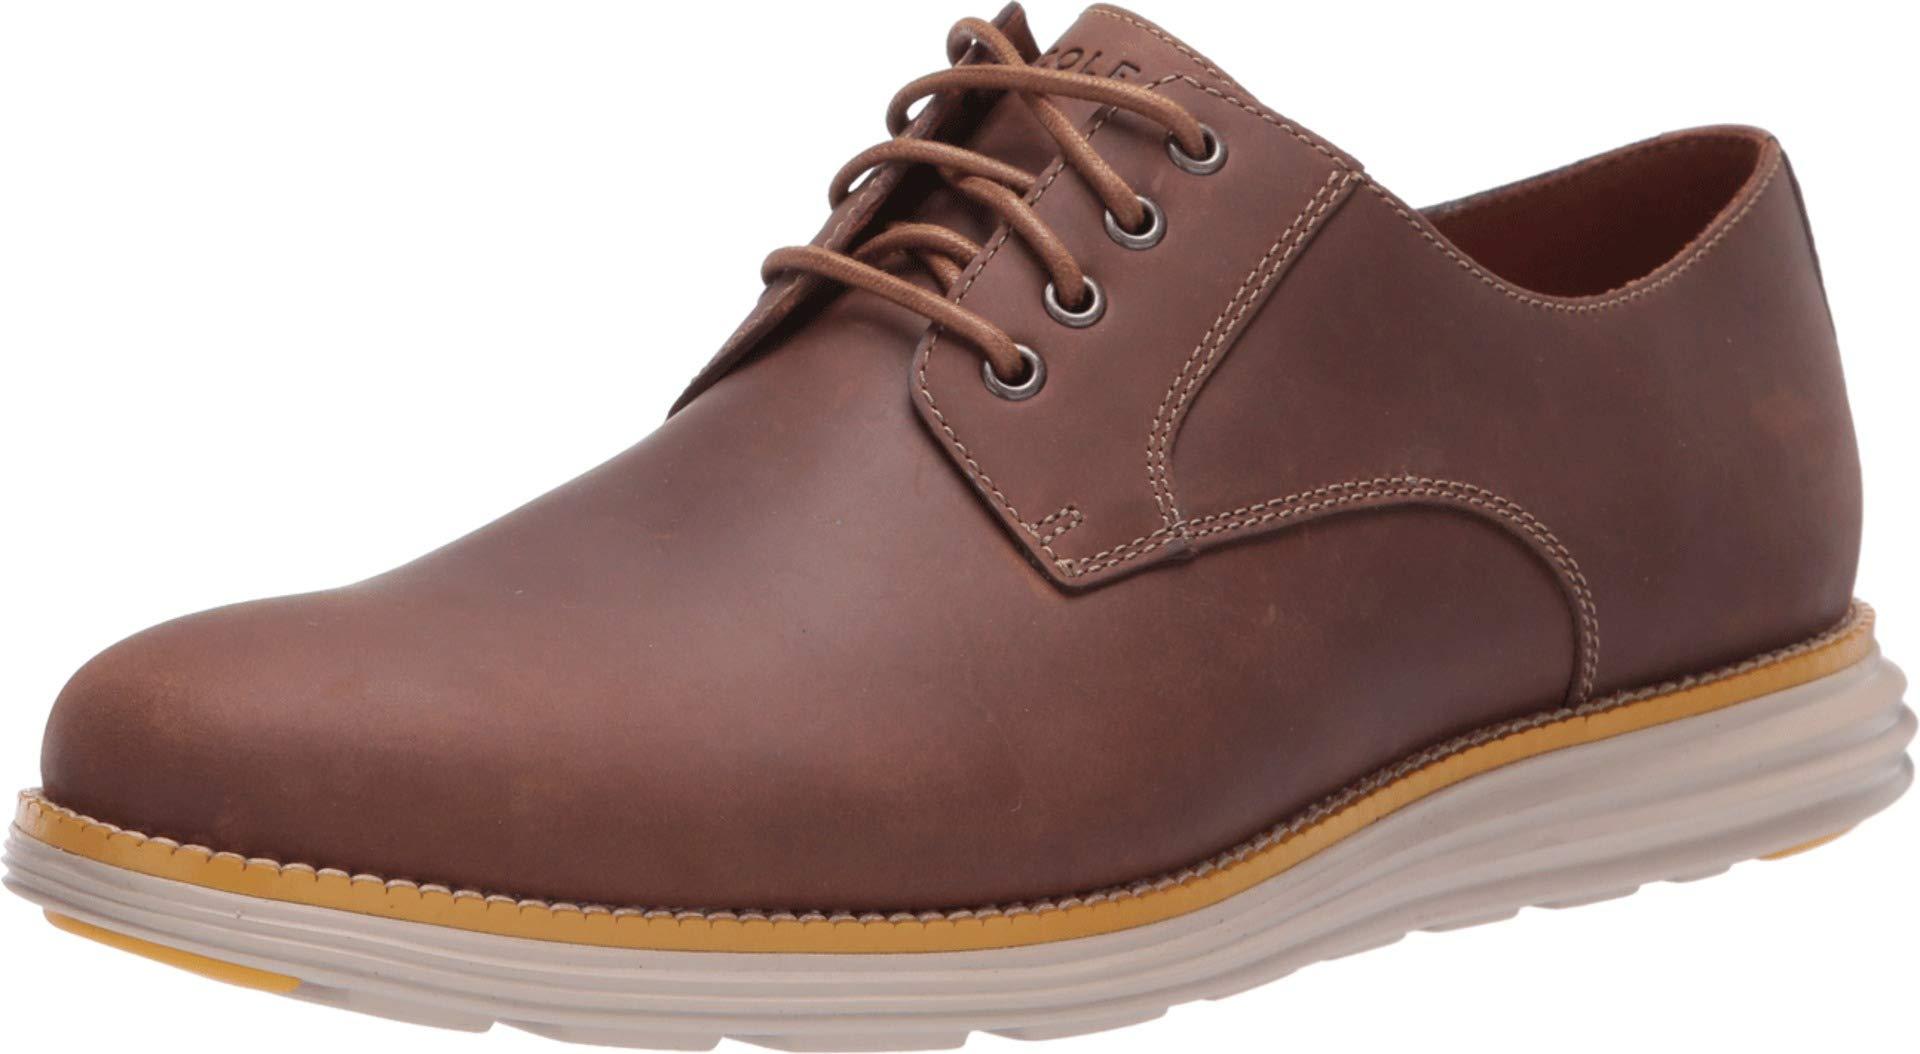 Cole Haan Leather Original Grand Plain Toe Oxford in Brown for Men - Lyst